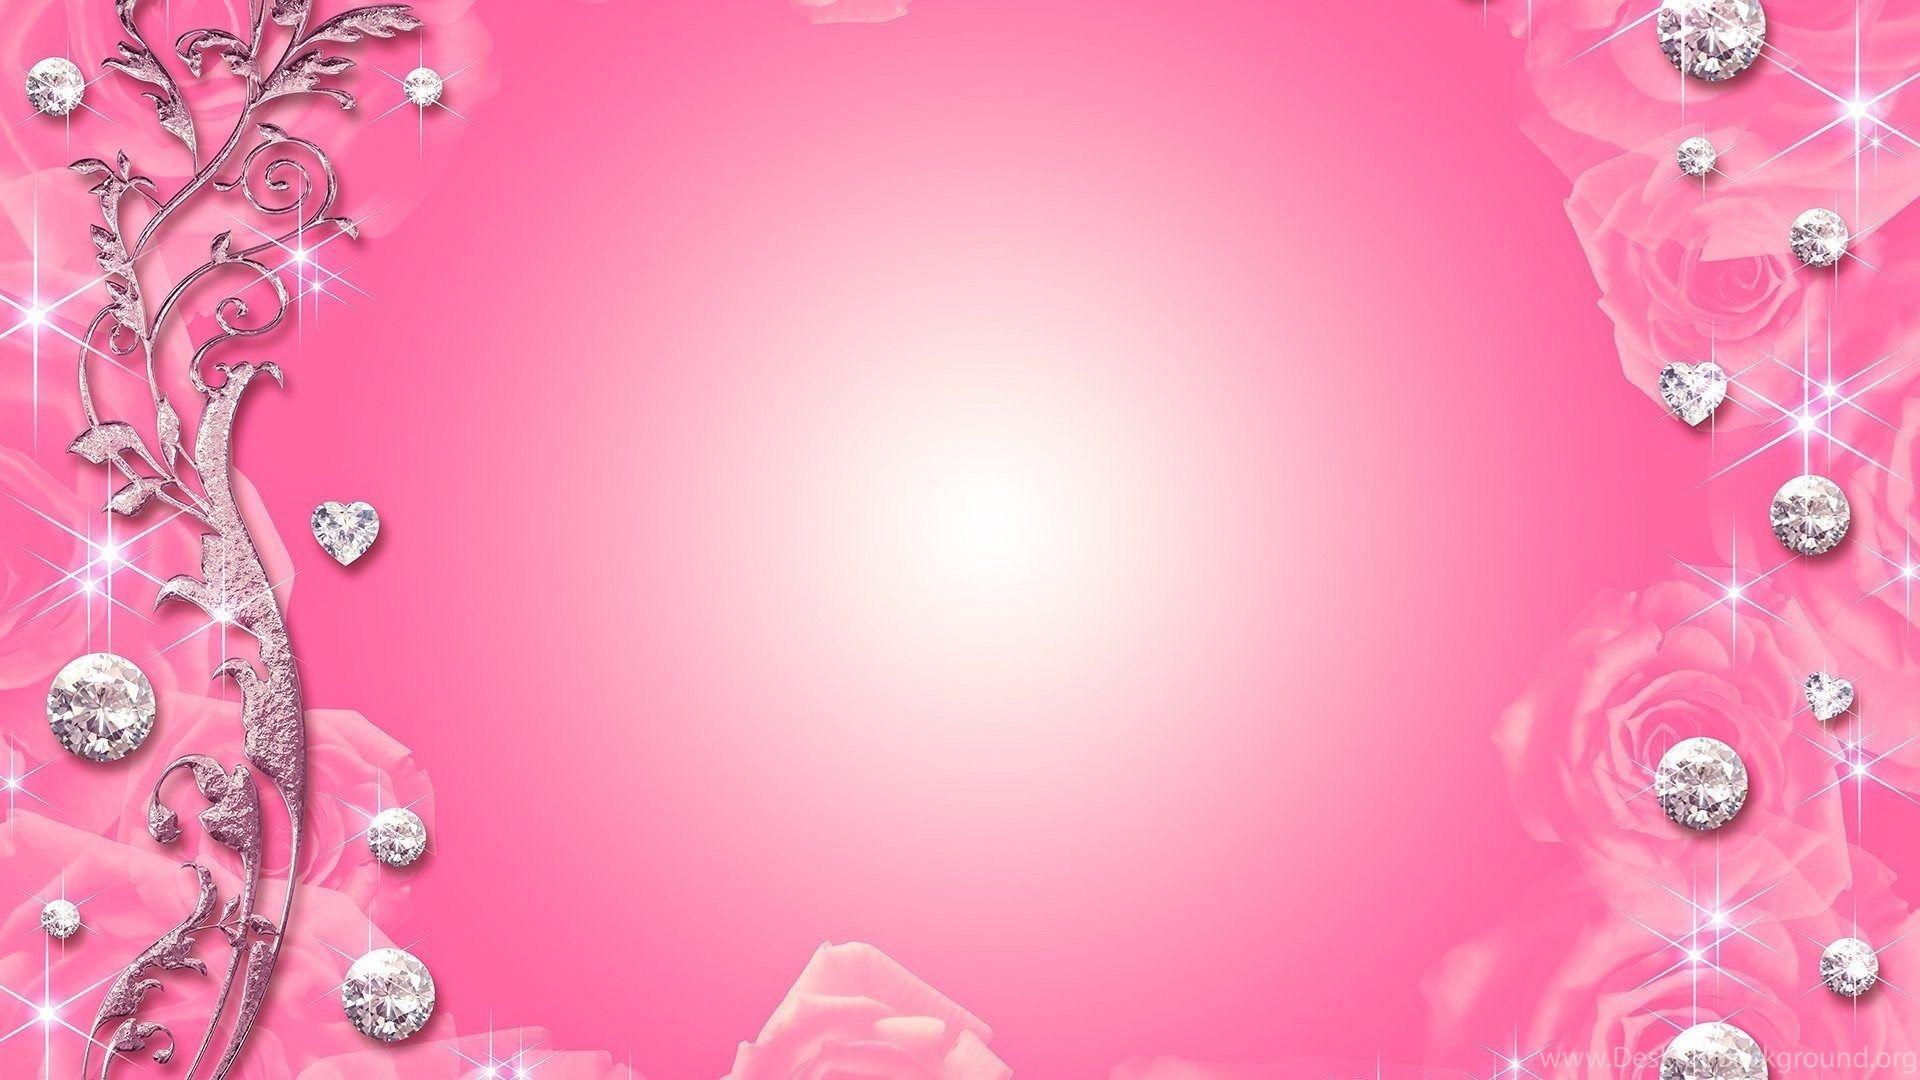 barbie pink background 12. Background Check All